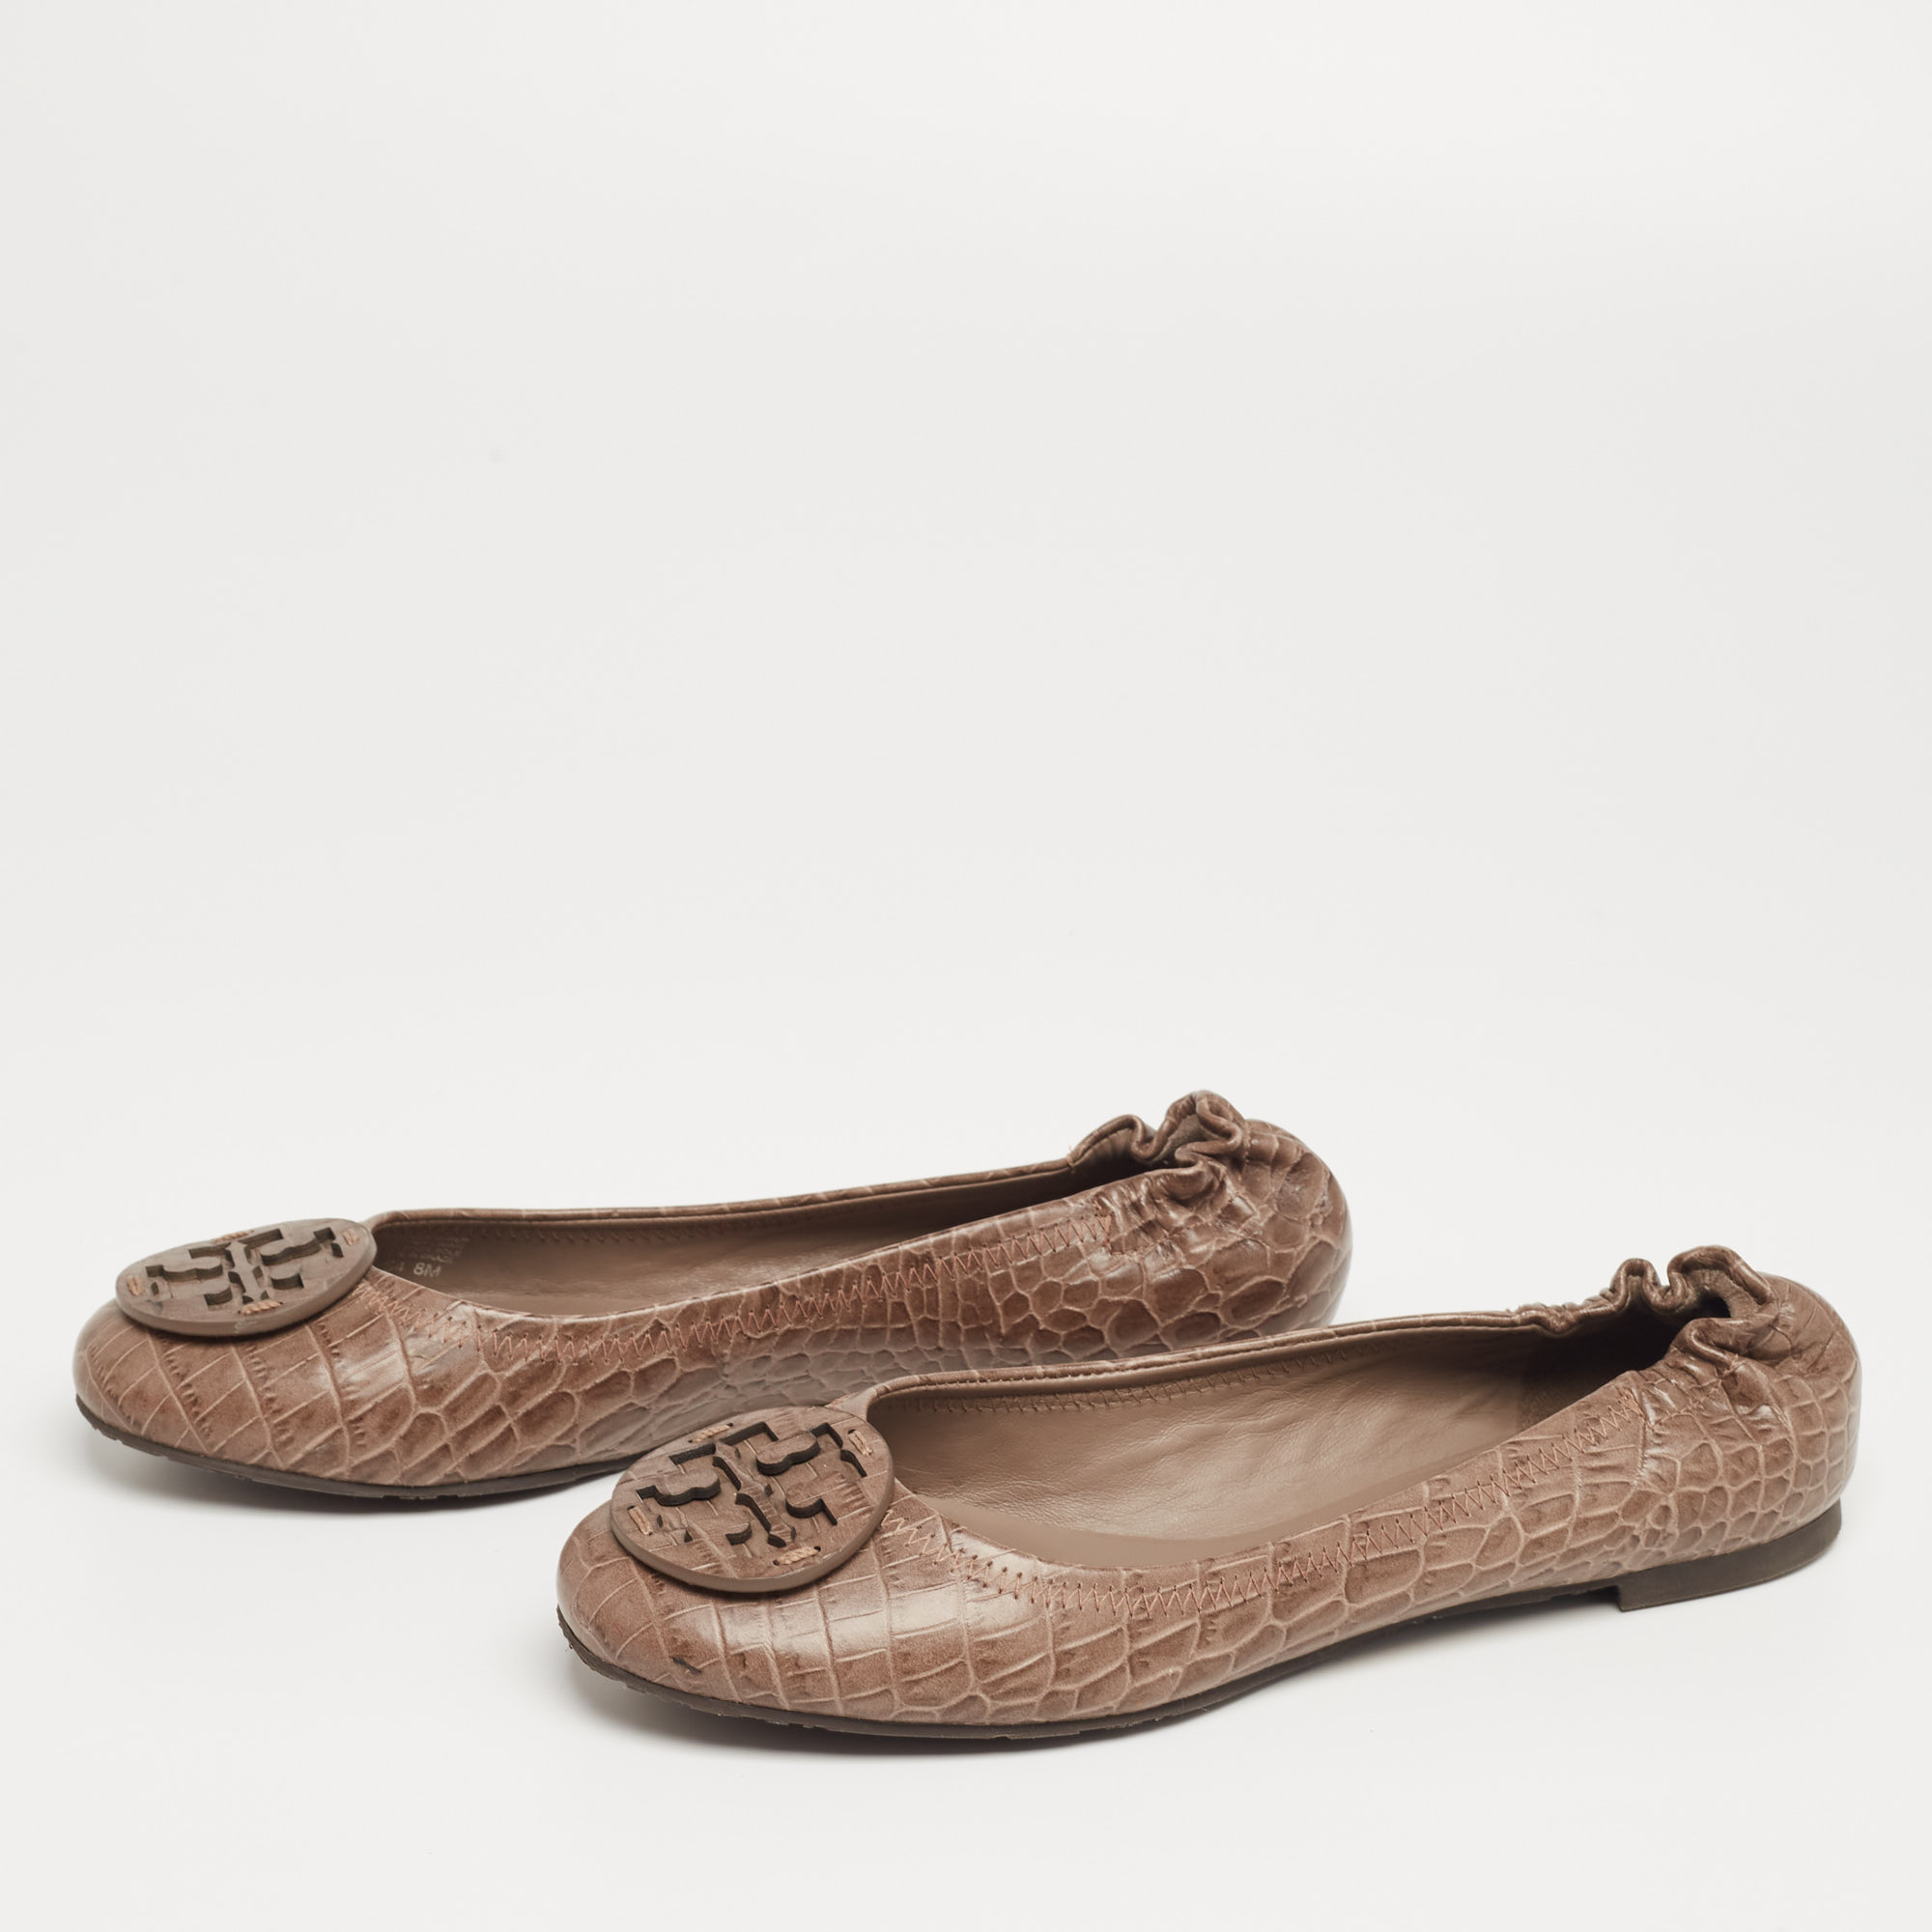 

Tory Burch Brown Croc Embossed Leather Reva Ballet Flats Size